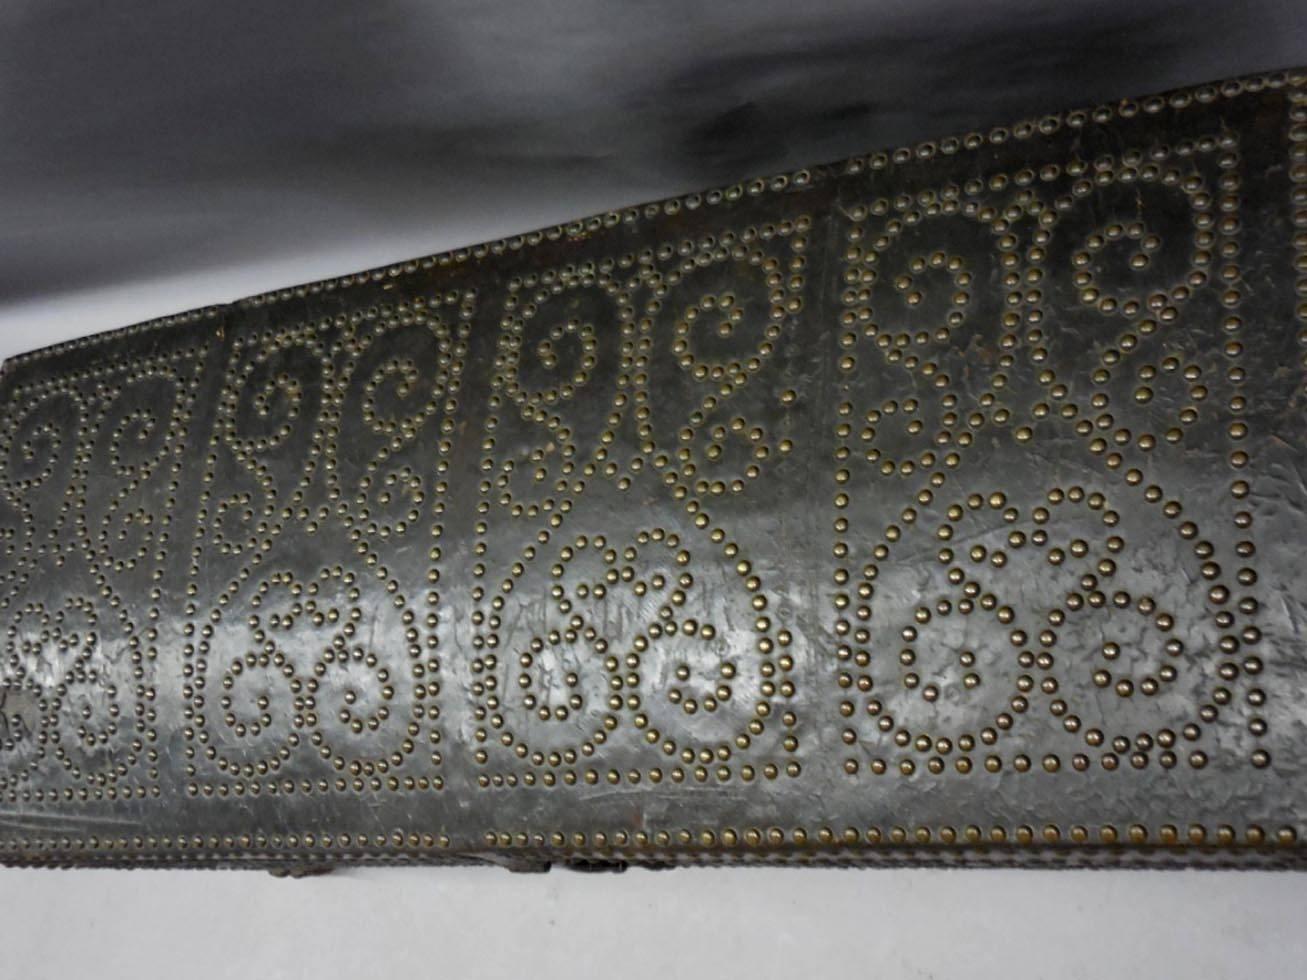 Domed leather coffer with brass studs, patterned in four quadrangles. Carved feet. All original hardware and in good condition considering its age. Some areas of leather are deteriorated but not interfering with form or function, 18th century